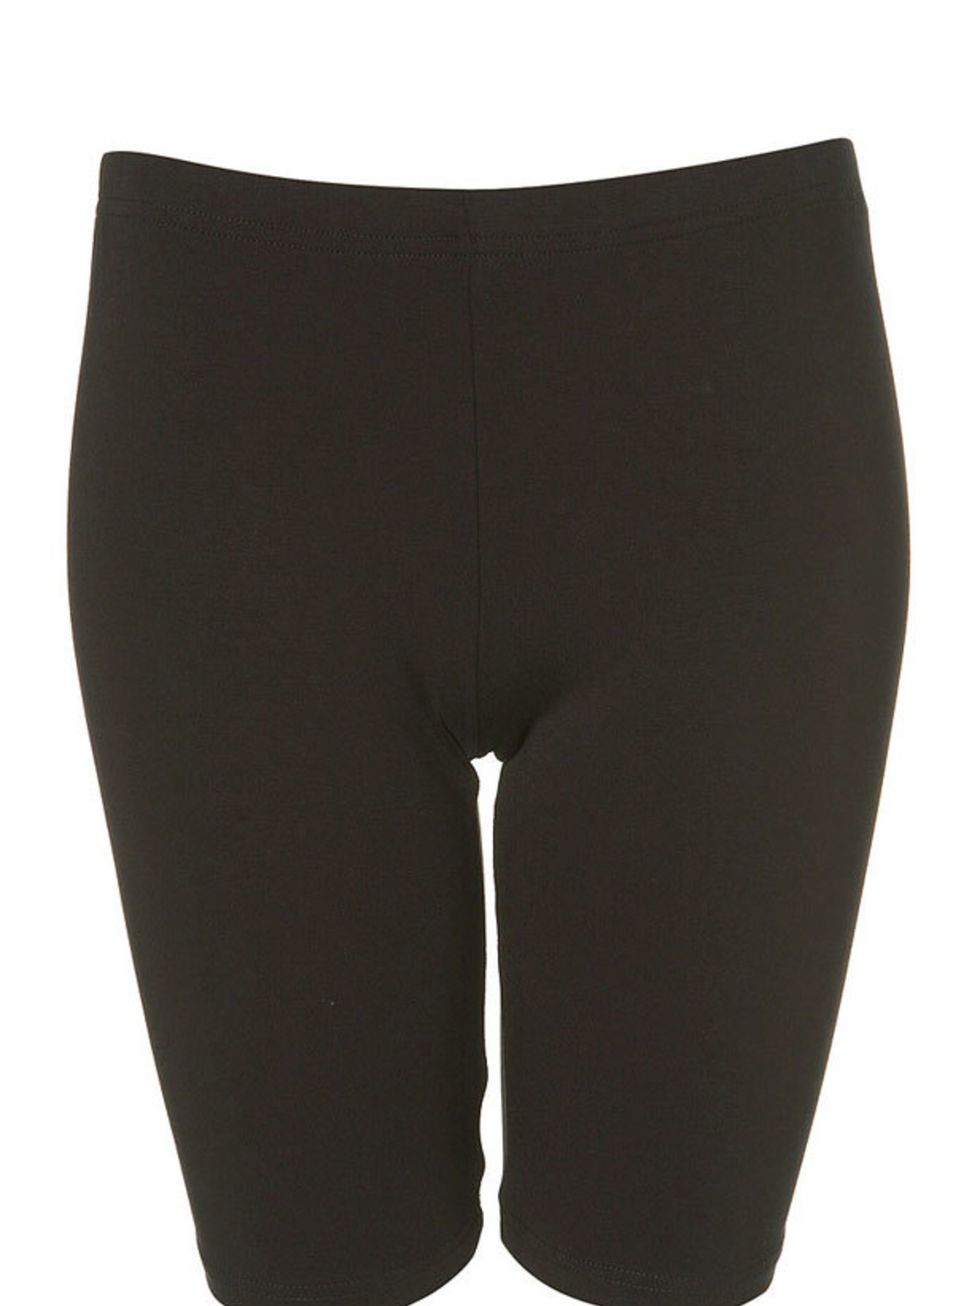 <p>Black cycling shorts, £14, by <a href="http://store.americanapparel.co.uk/rsa8335.html?cid=178">American Apparel</a> </p>